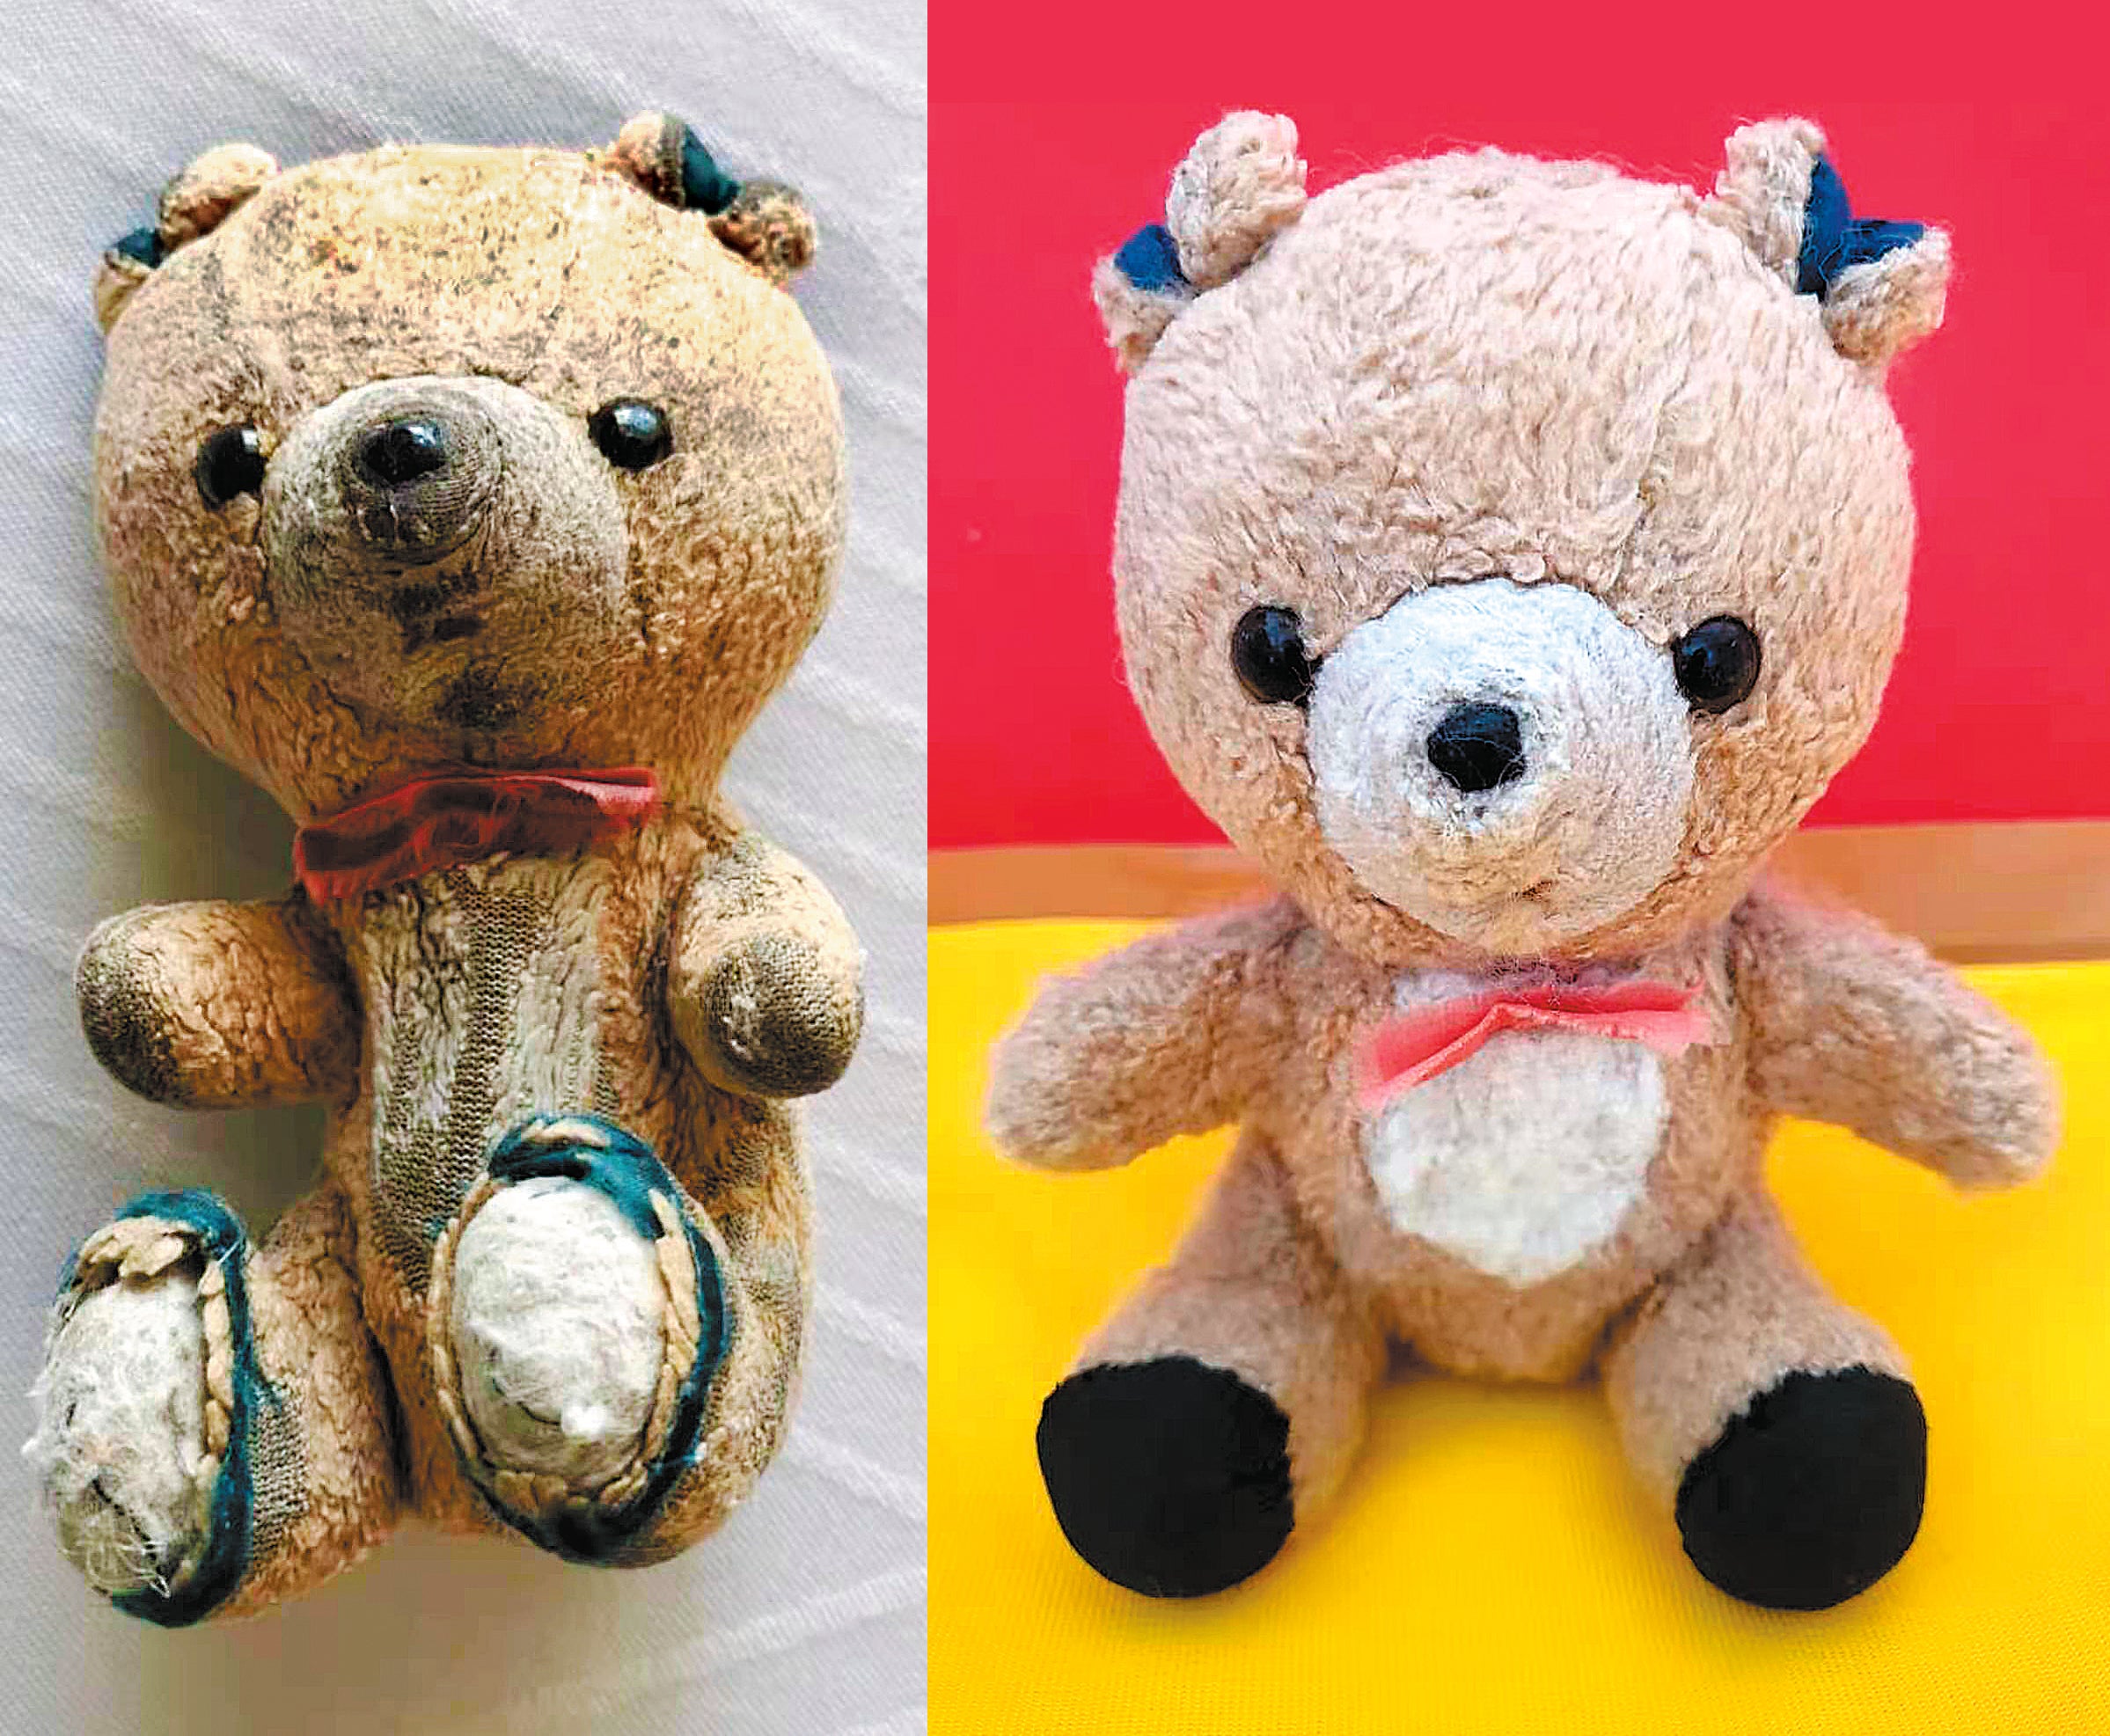 A teddy bear bought 41 years ago before and after Zhu’s restoration